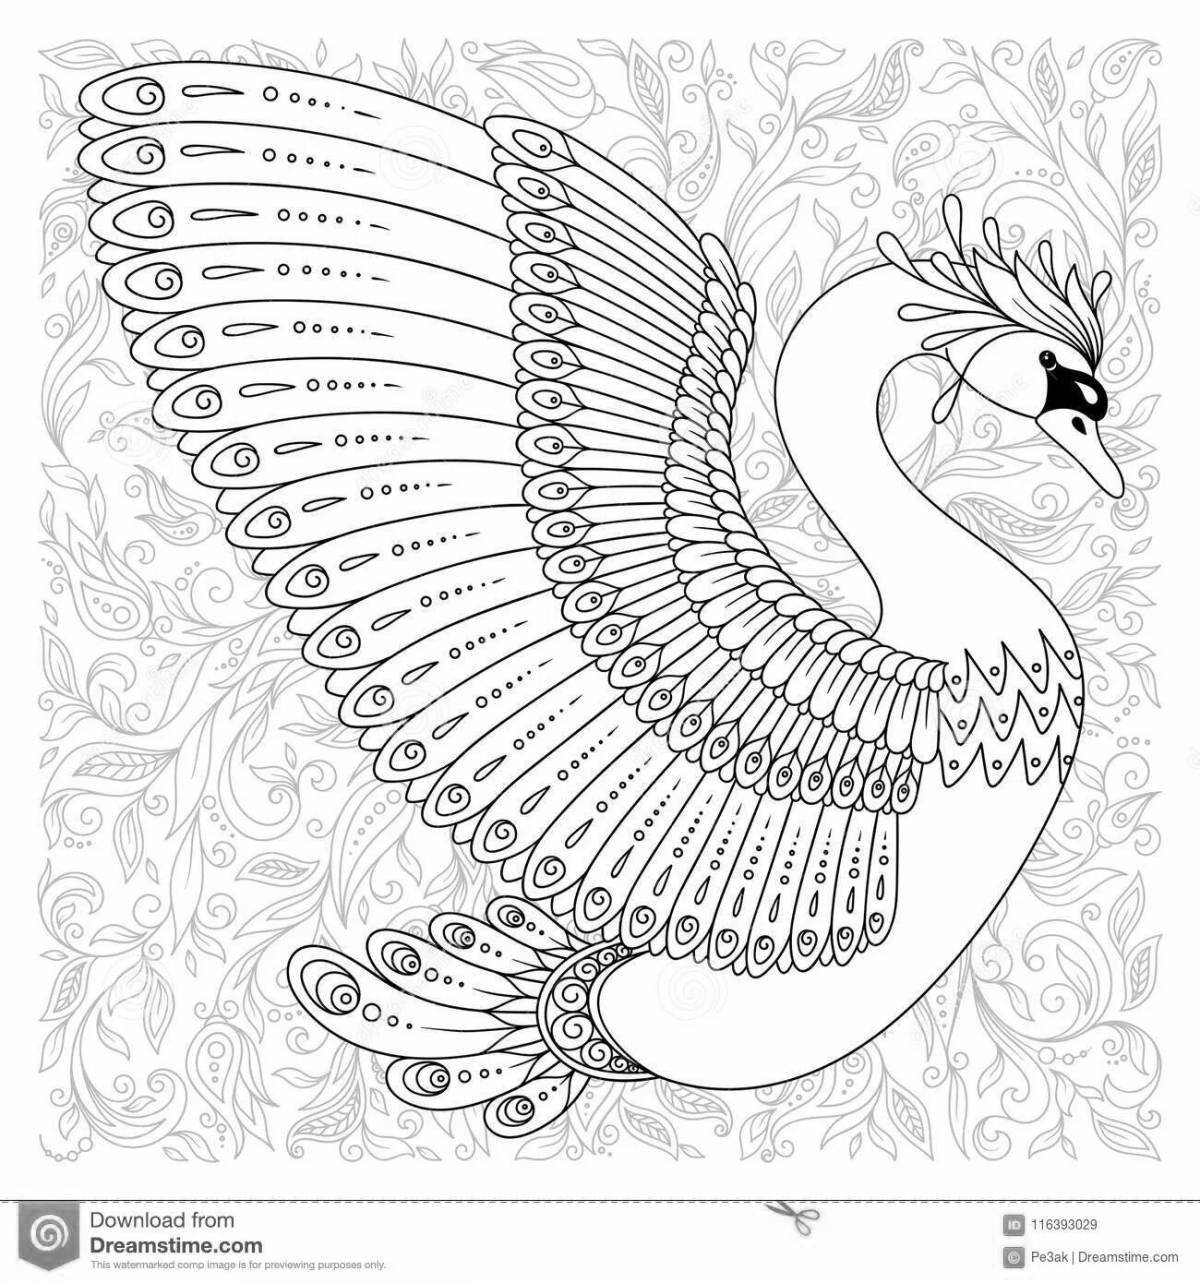 Coloring book soothing antistress swan